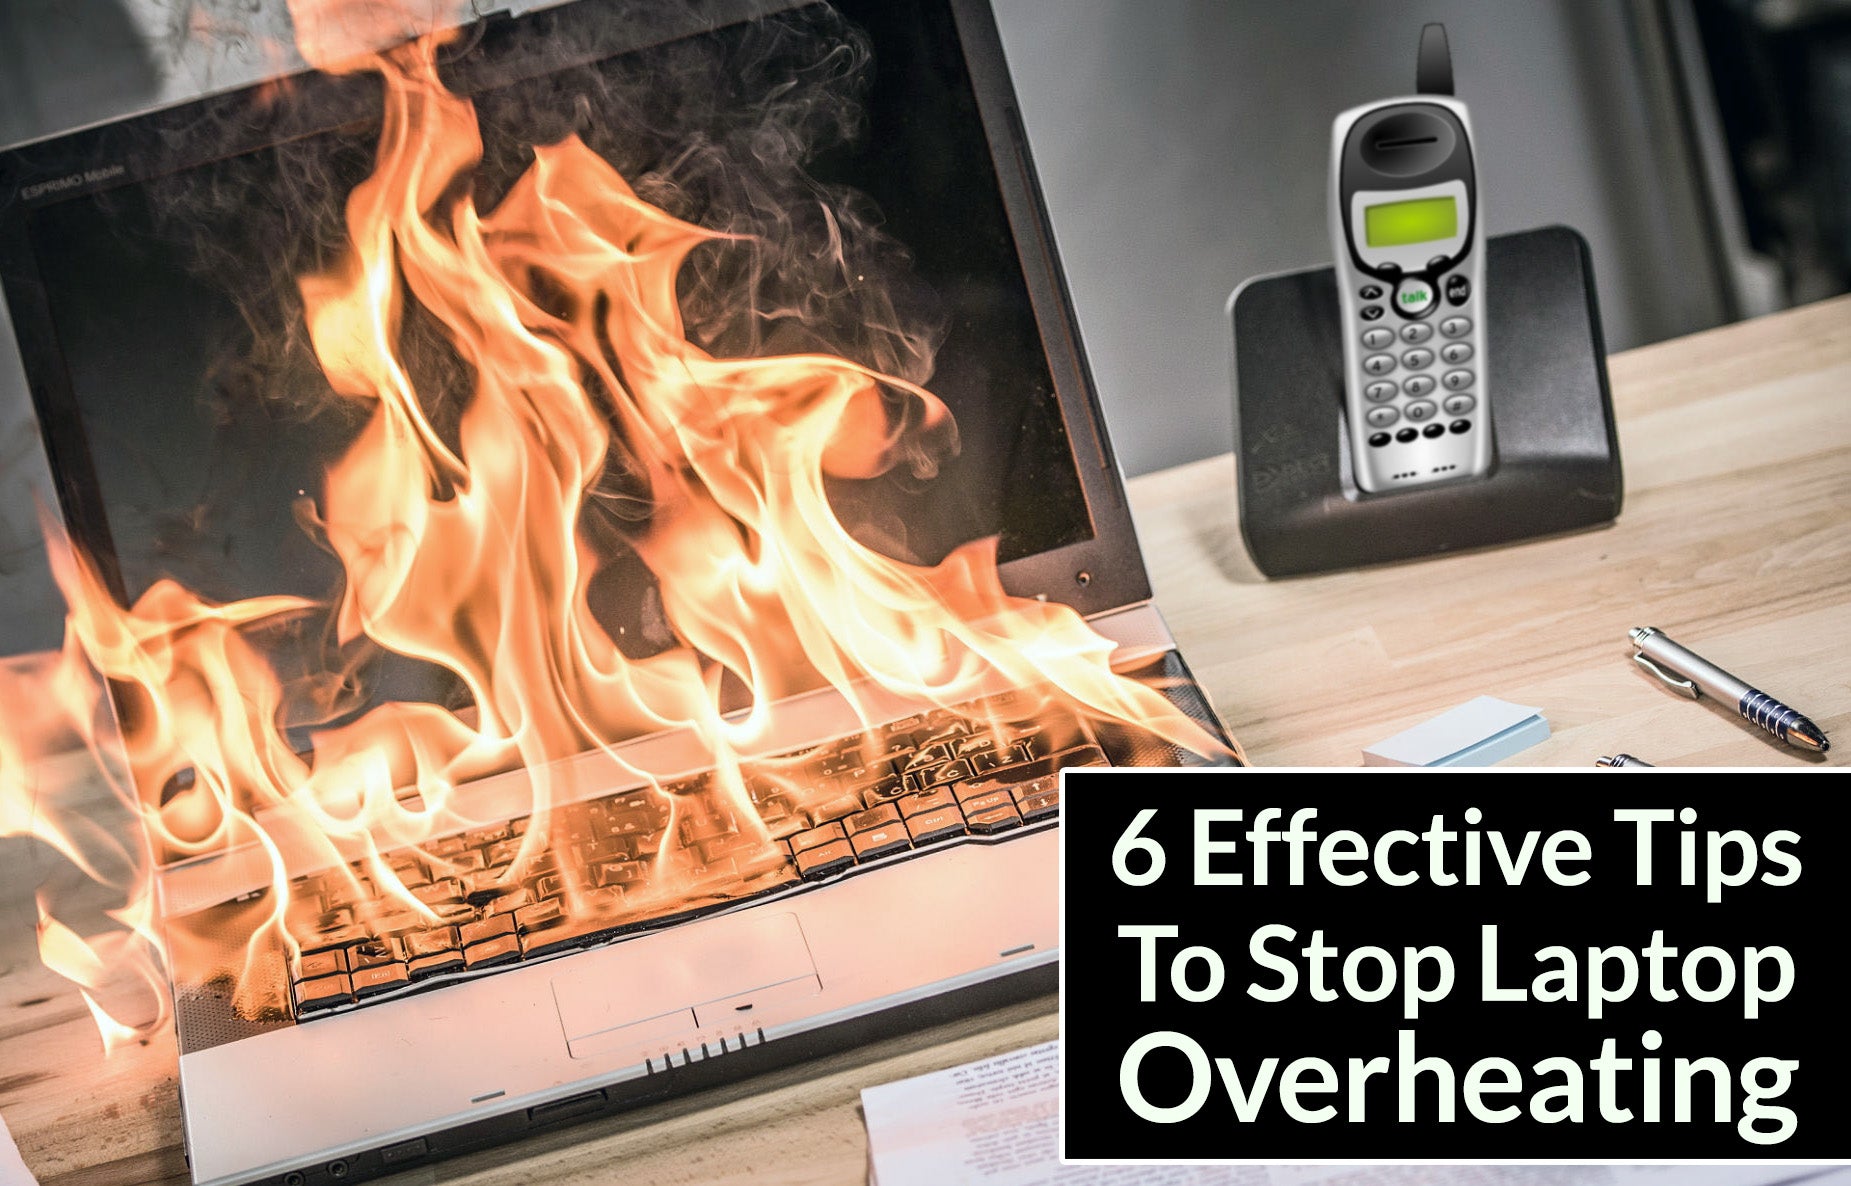 Simple Tips To Keep Your Laptop from Overheating